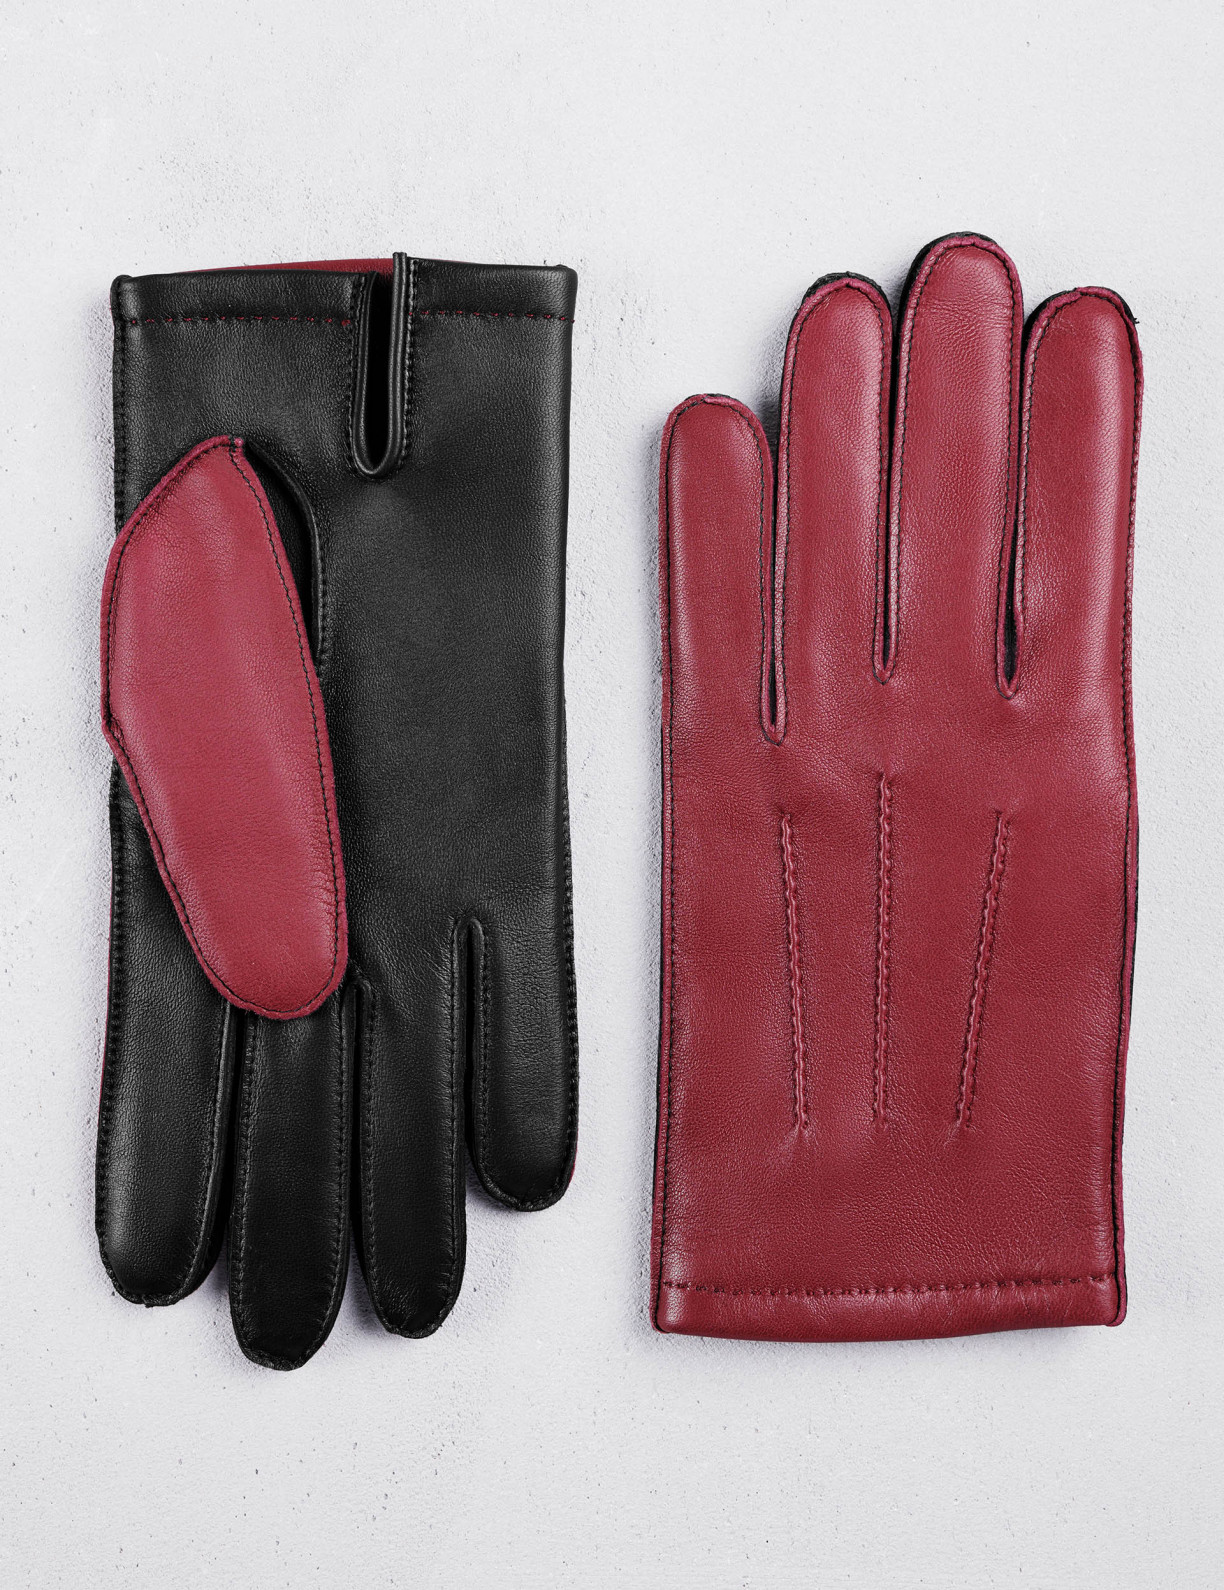 Gants homme LEVI'S article 228864 red tab gloves - made in Italy